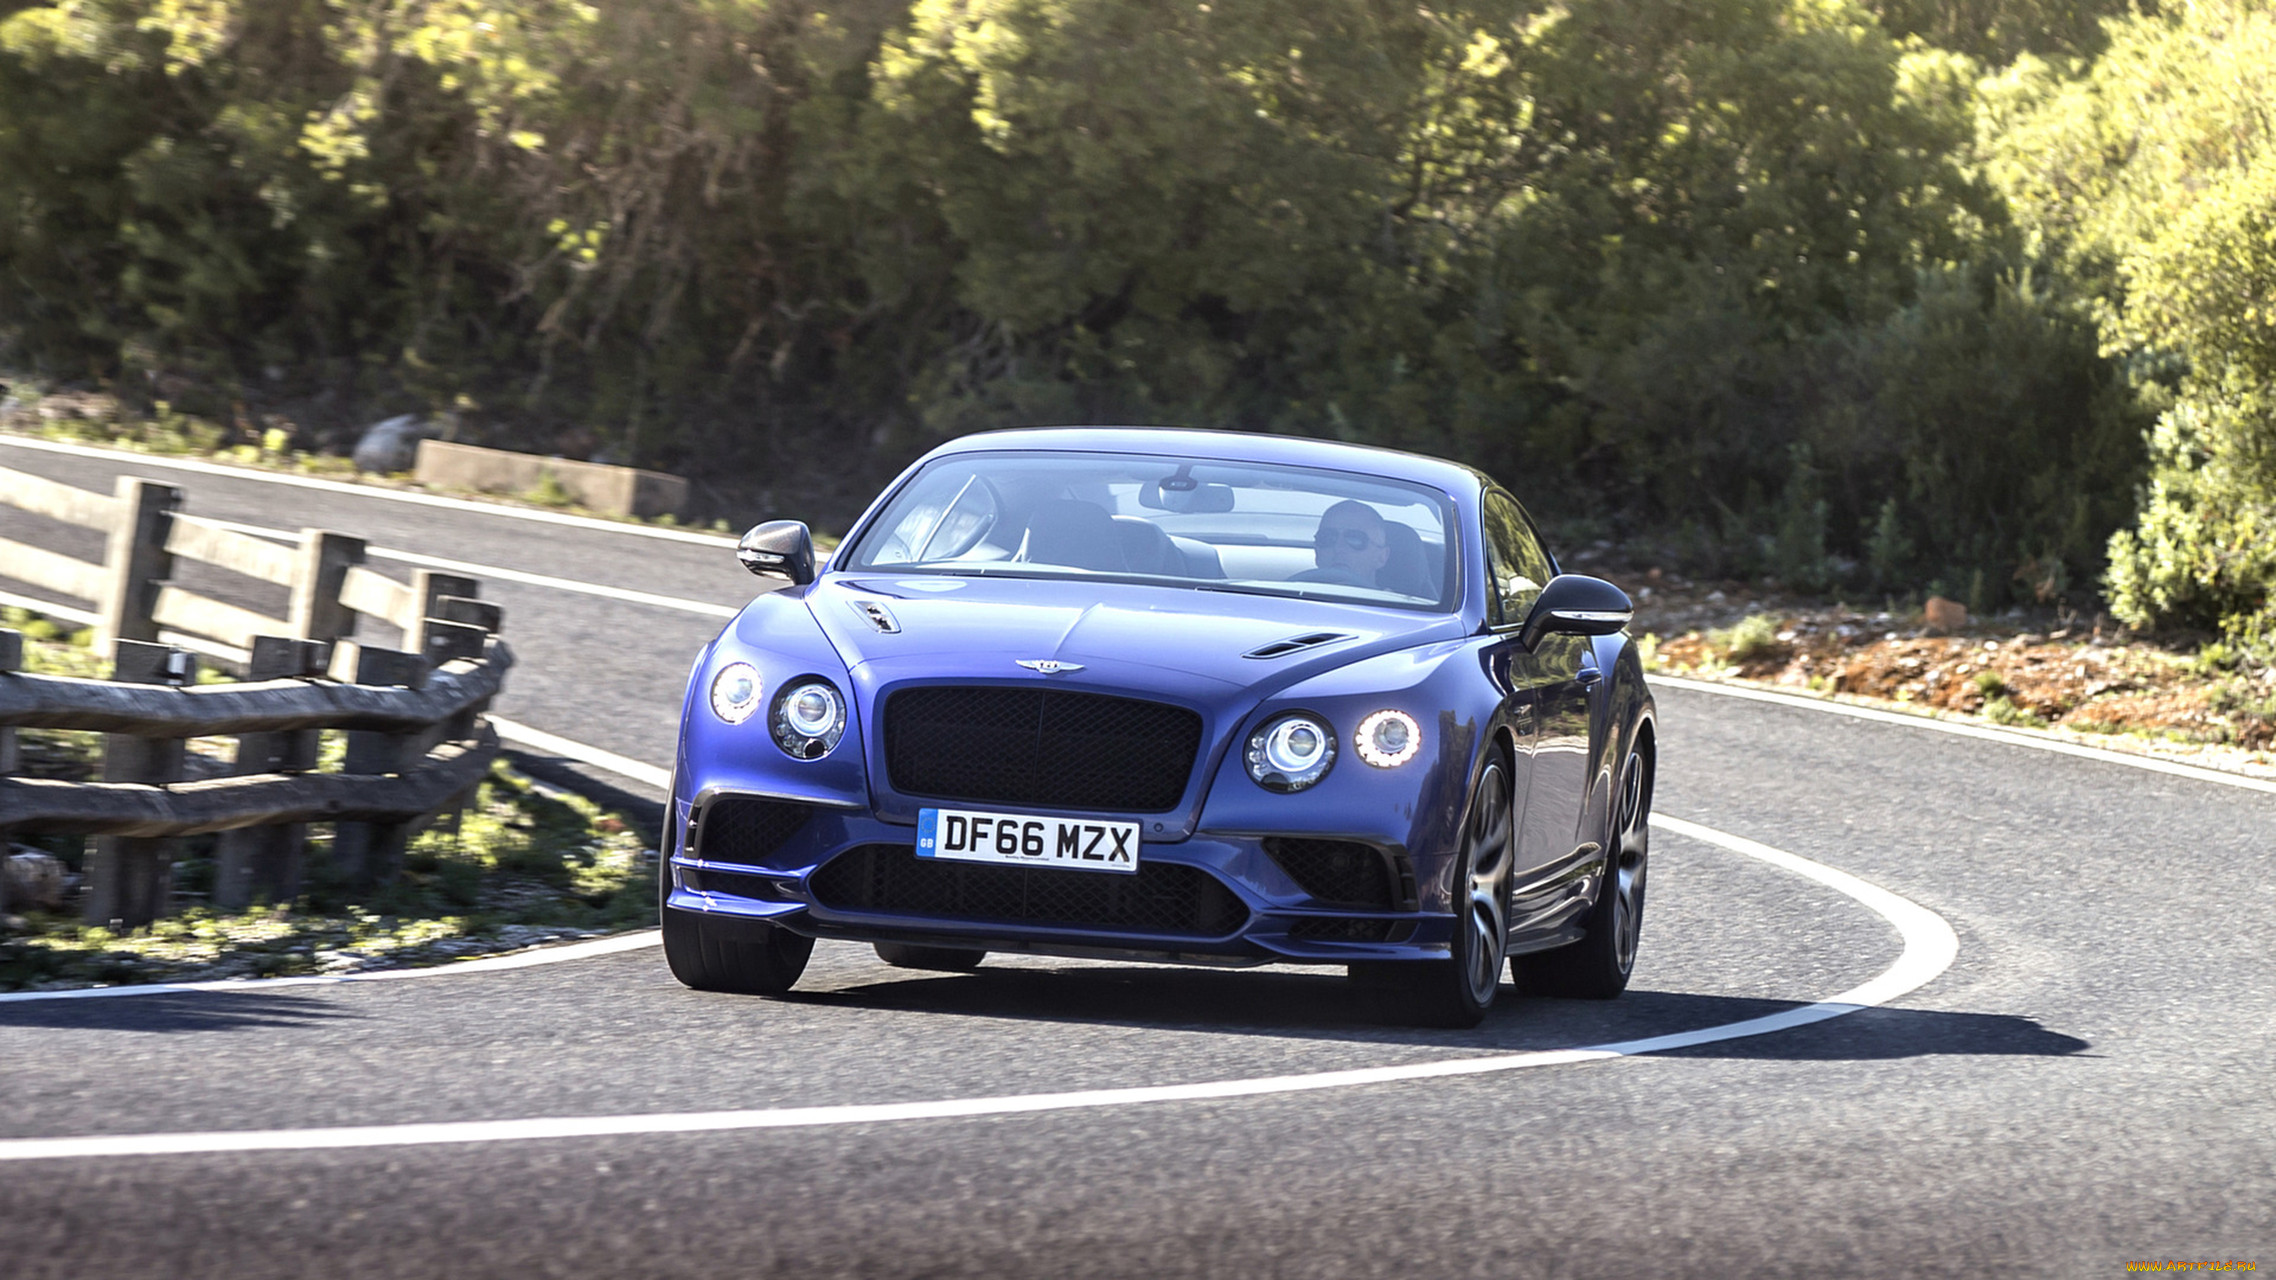 bentley continental gt supersports coupe 2018, , bentley, 2018, coupe, supersports, gt, continental